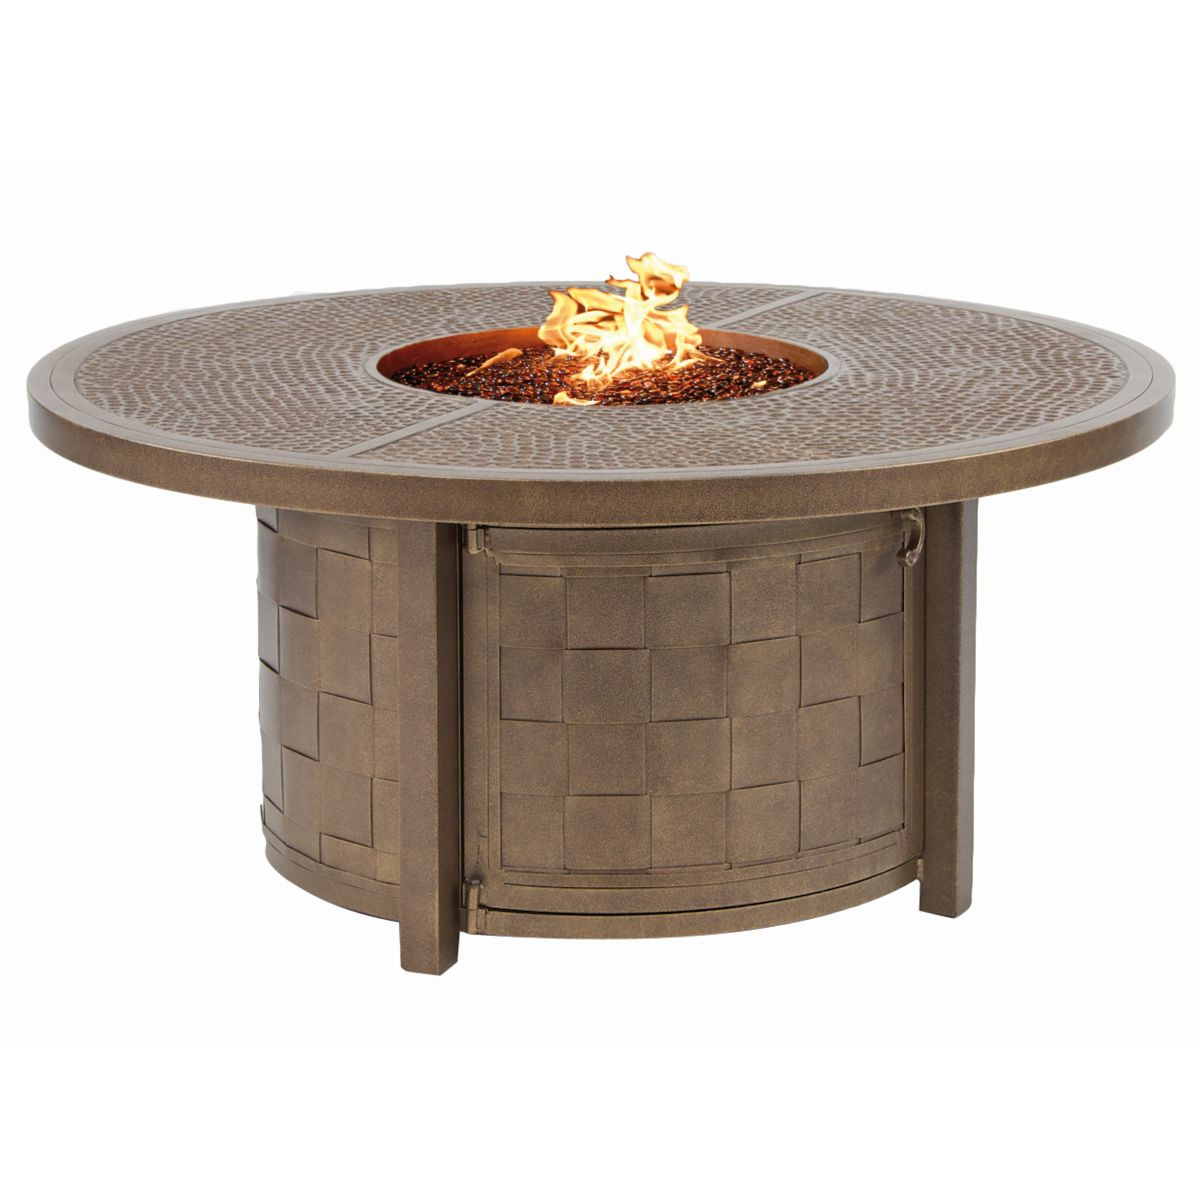 Best ideas about Fire Pit Coffee Table
. Save or Pin Castelle Resort Fire Pit 49 Round Coffee Table Now.